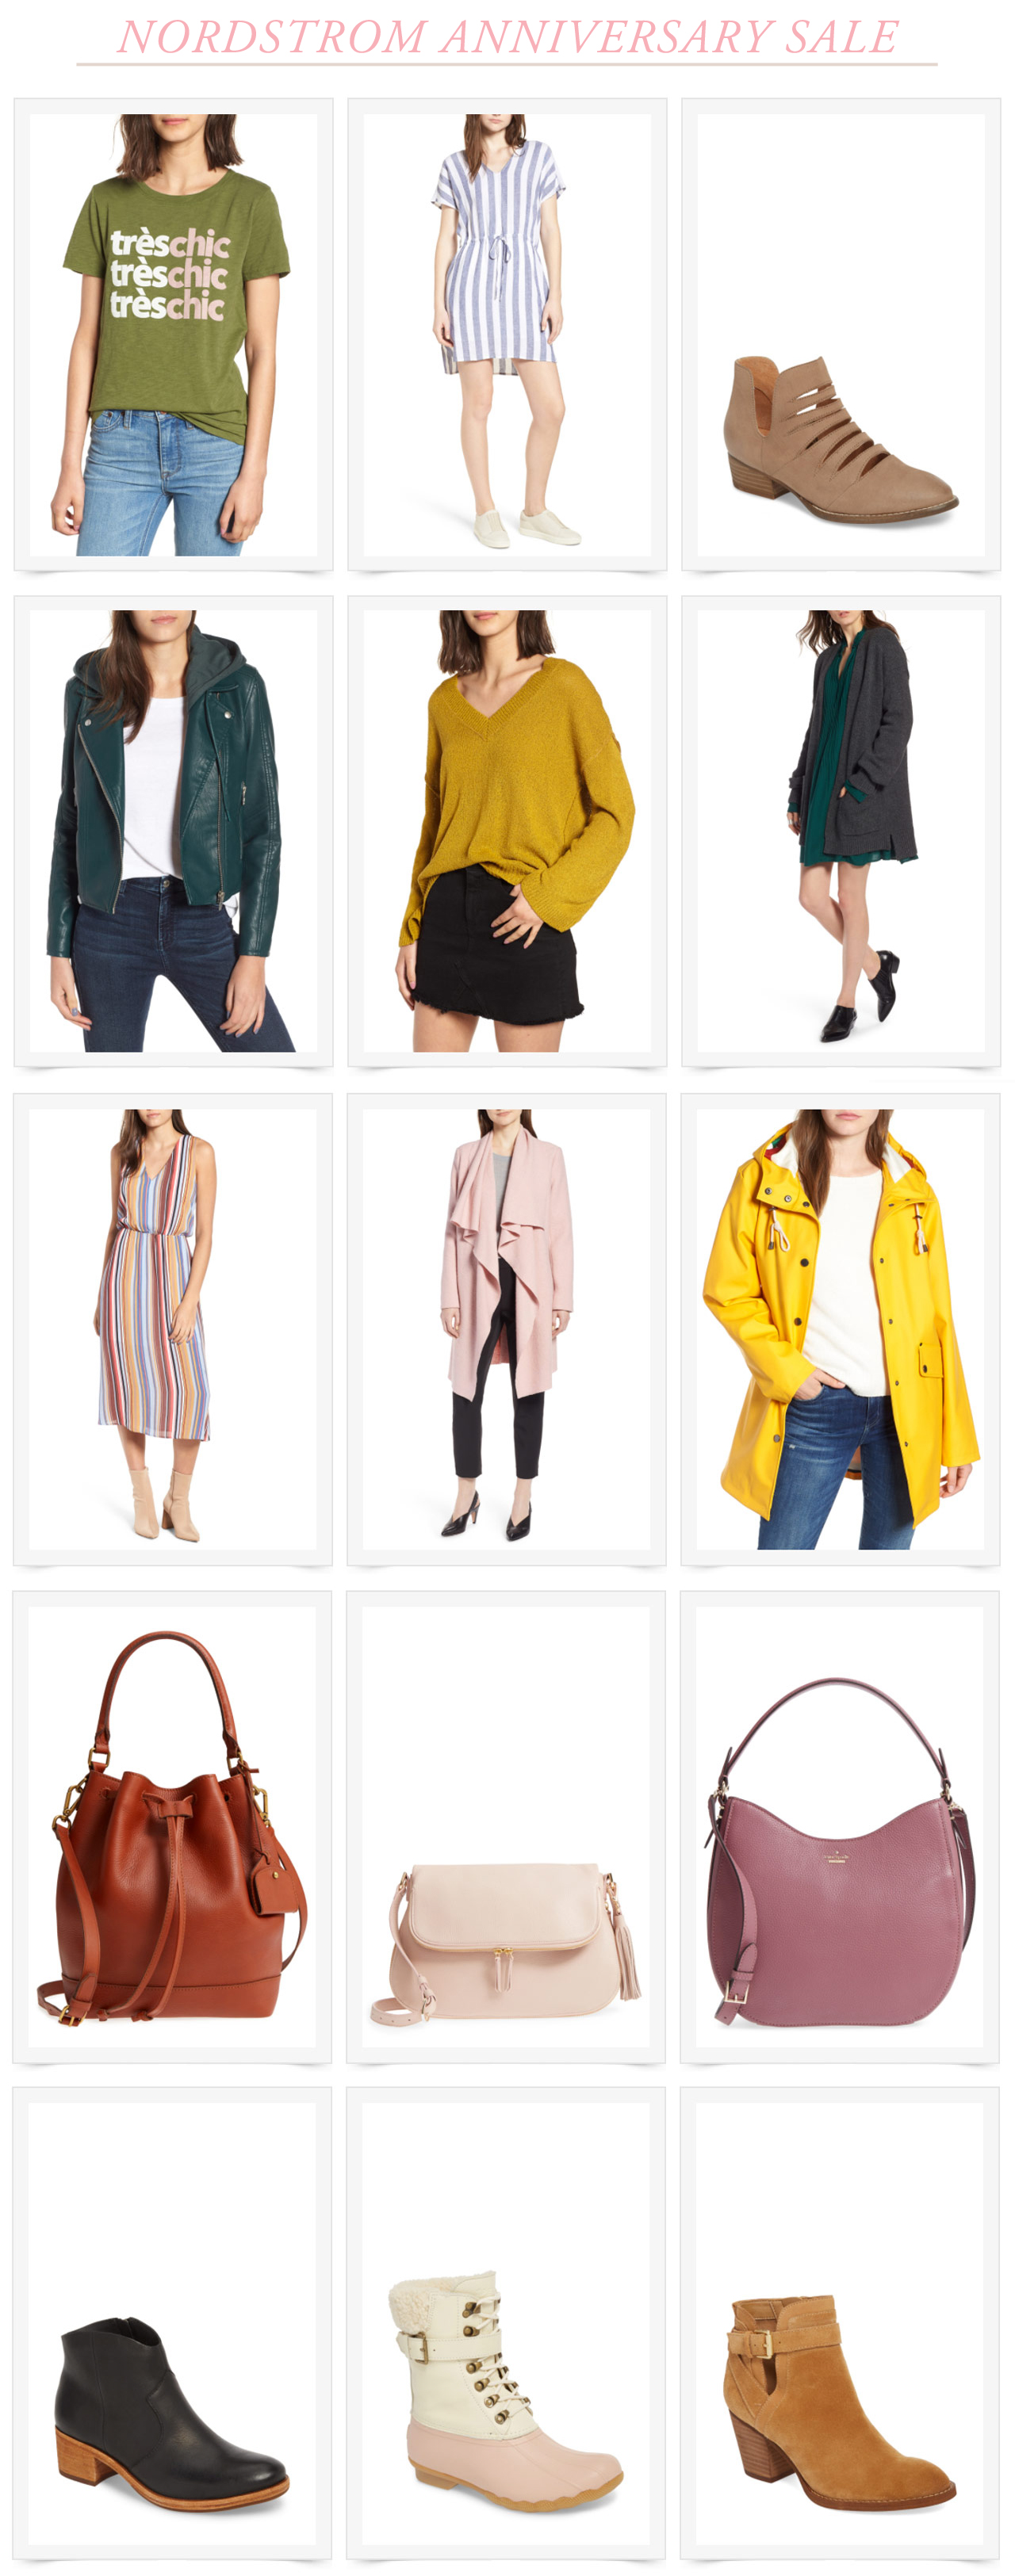 My Faves from the Nordstrom Anniversary Sale